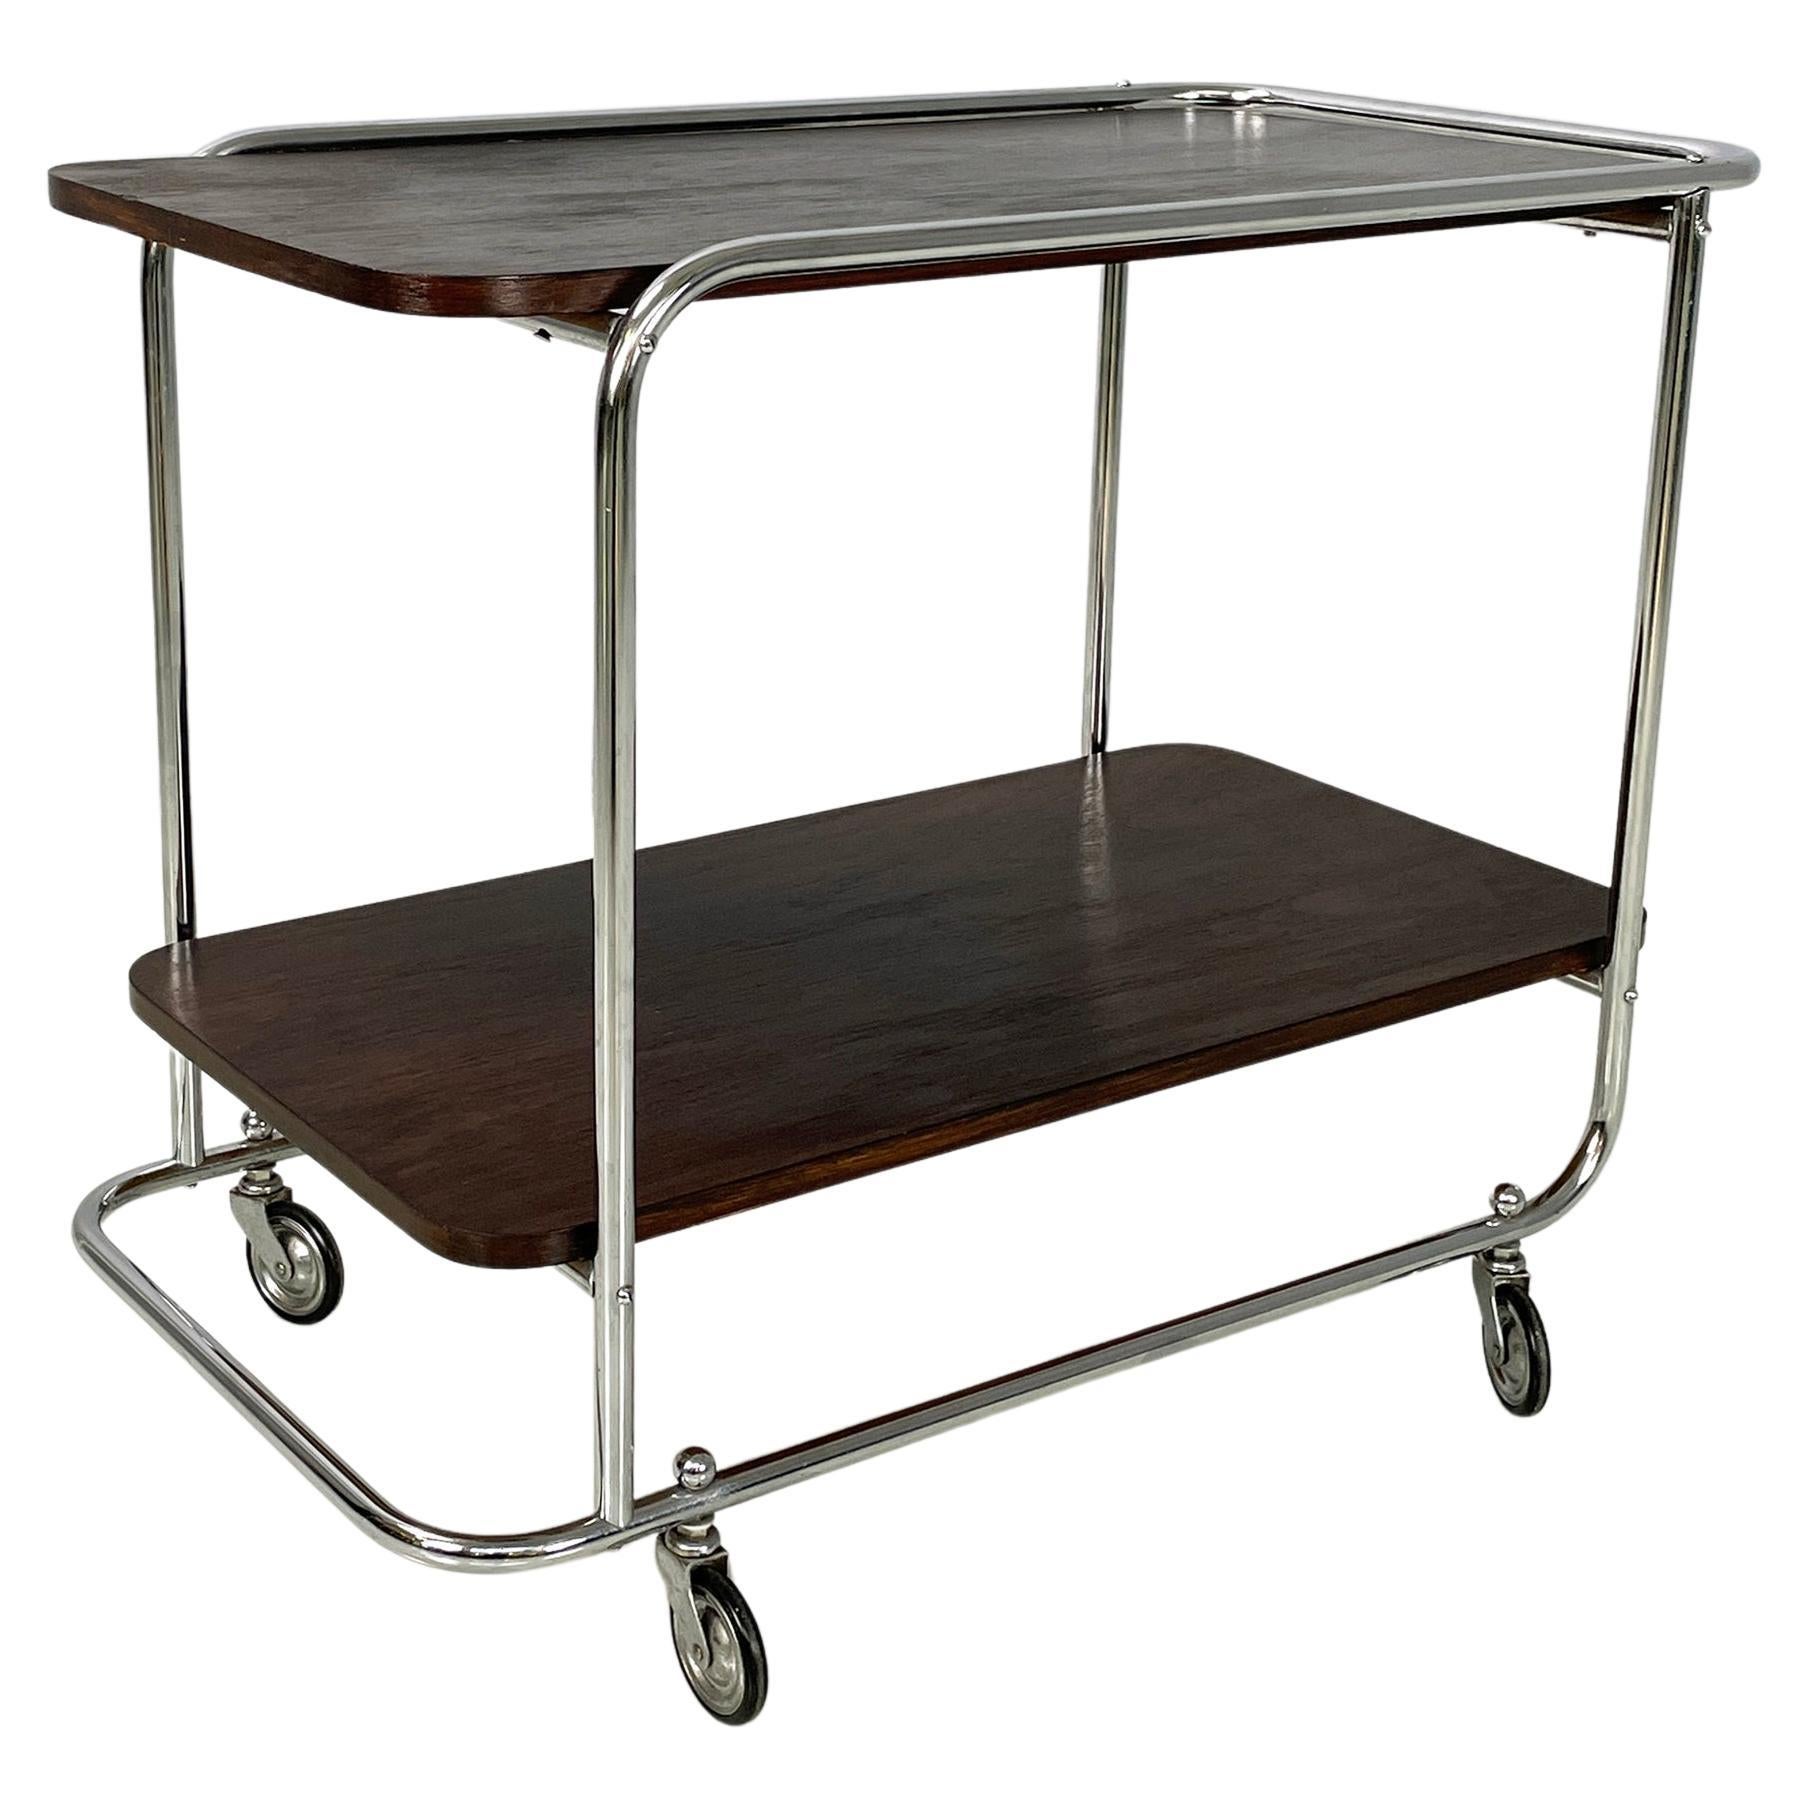 Italian mid-century modern Wood and metal cart with double shelf, 1940s